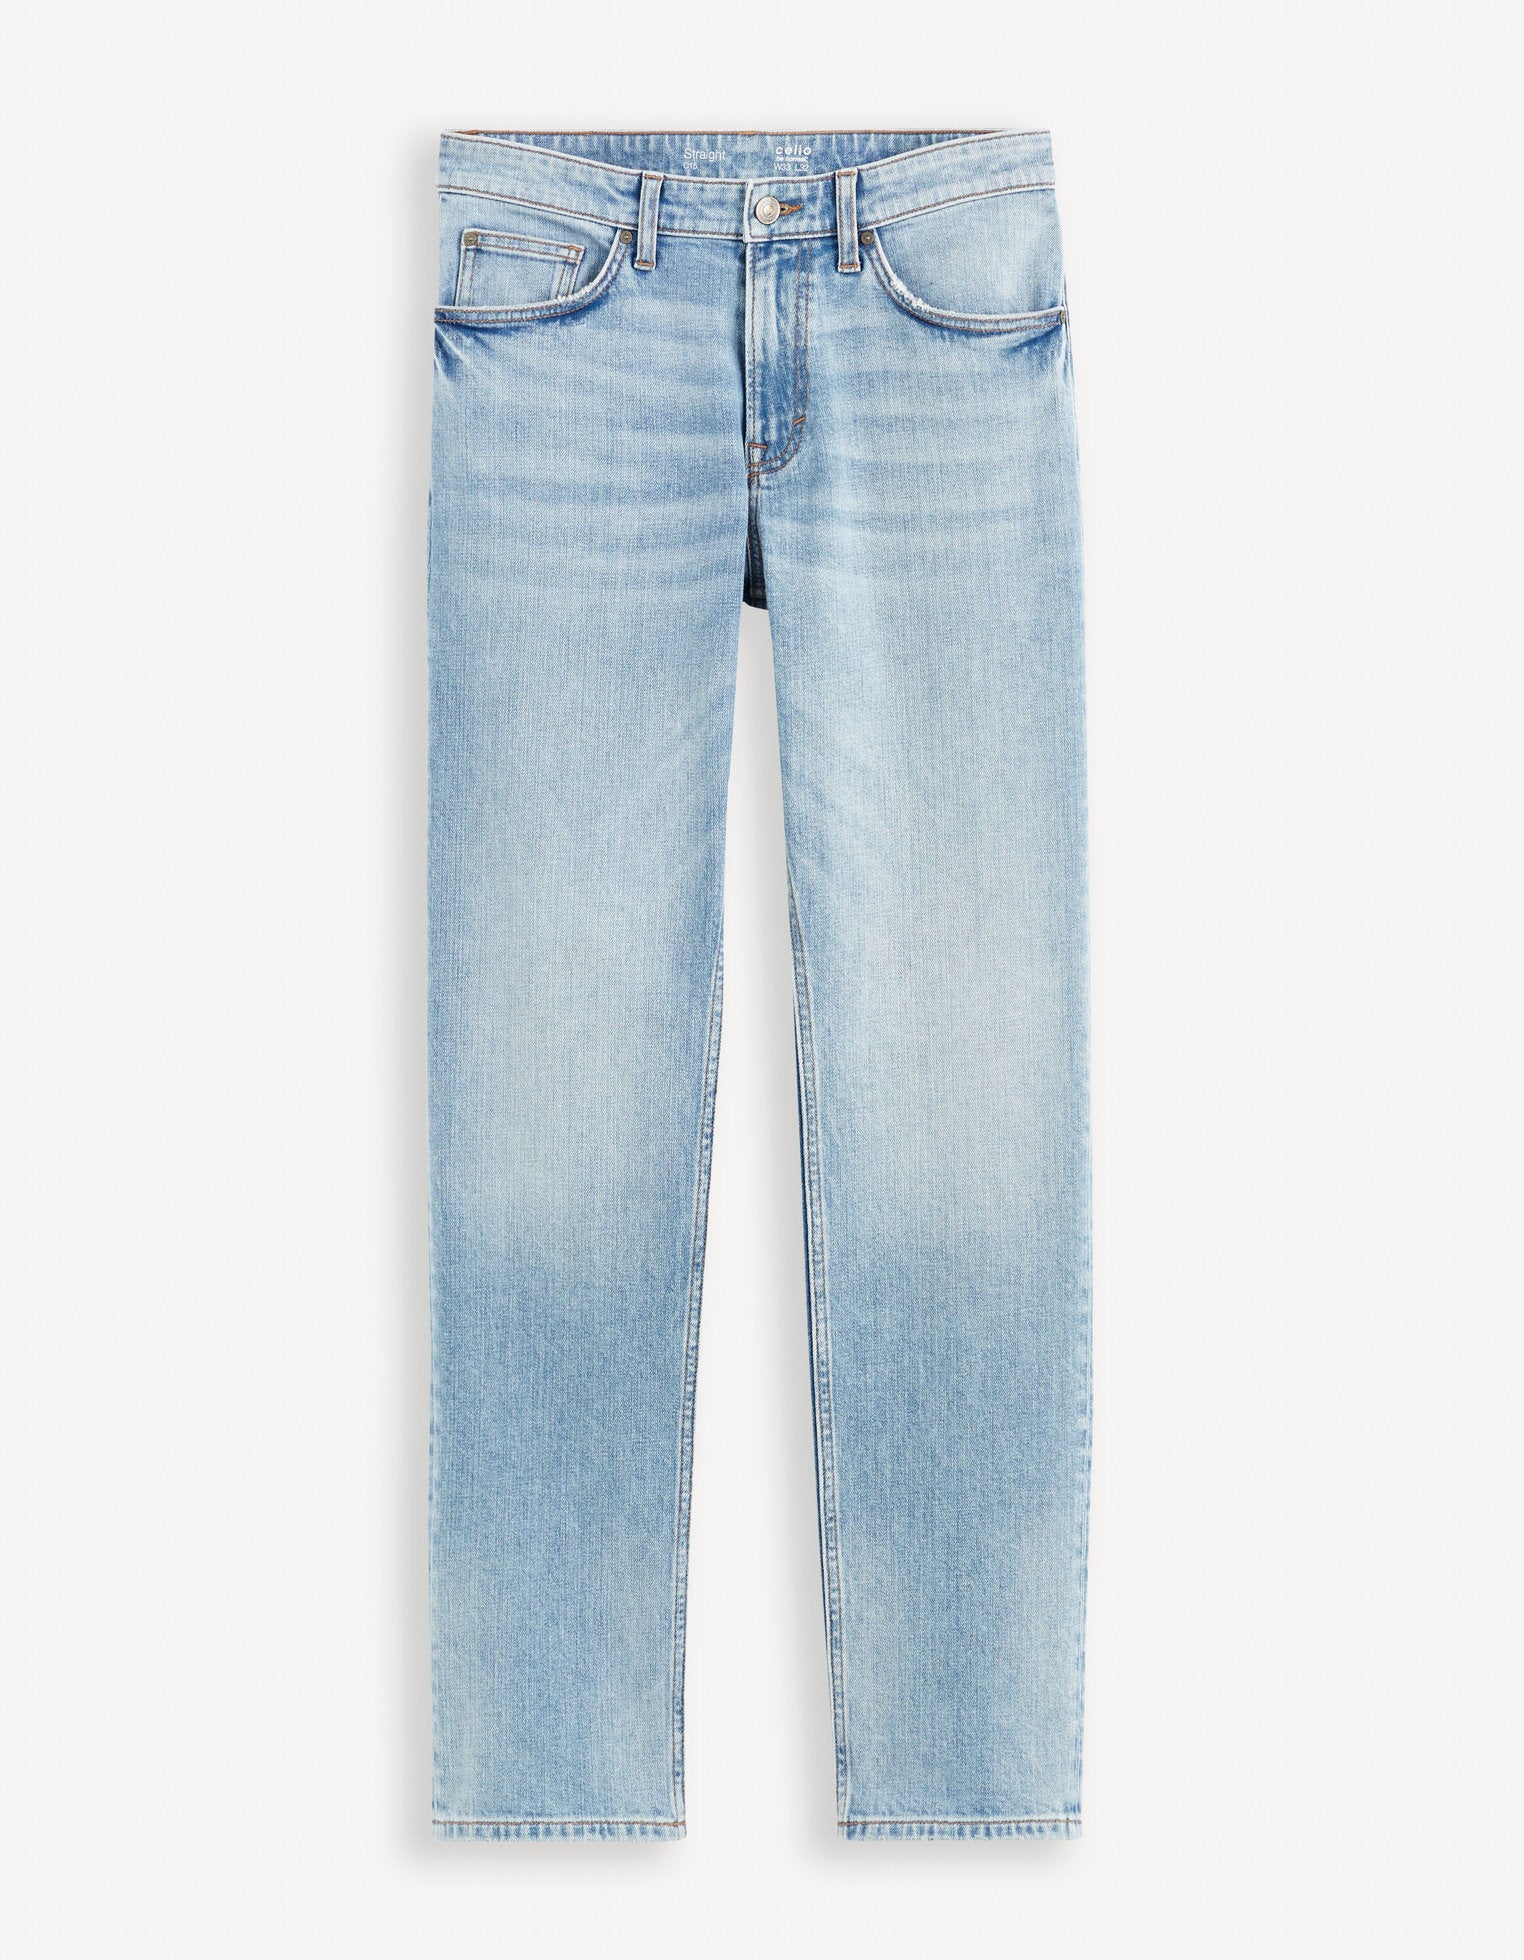 C15 3-Length Straight Jeans - Bleached_DOSTRA15_BLEACHED_02